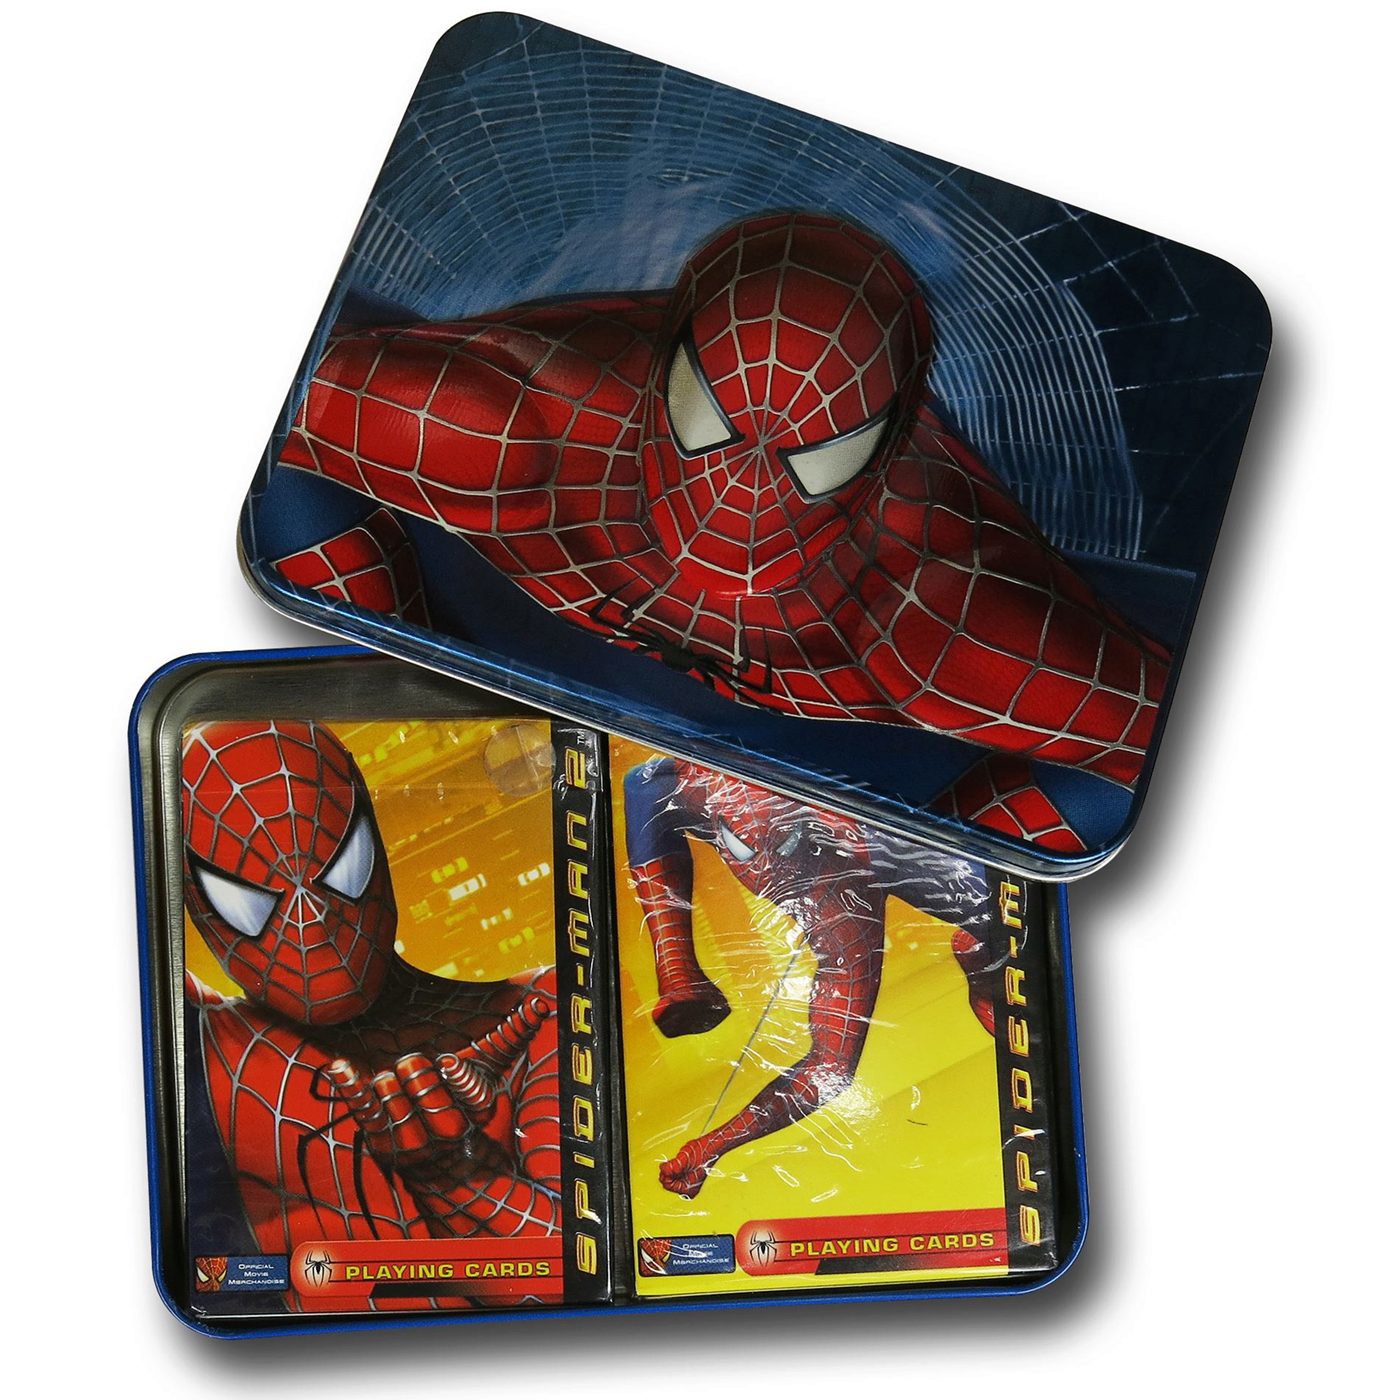 Spiderman 2 Playing Cards in Image Tin